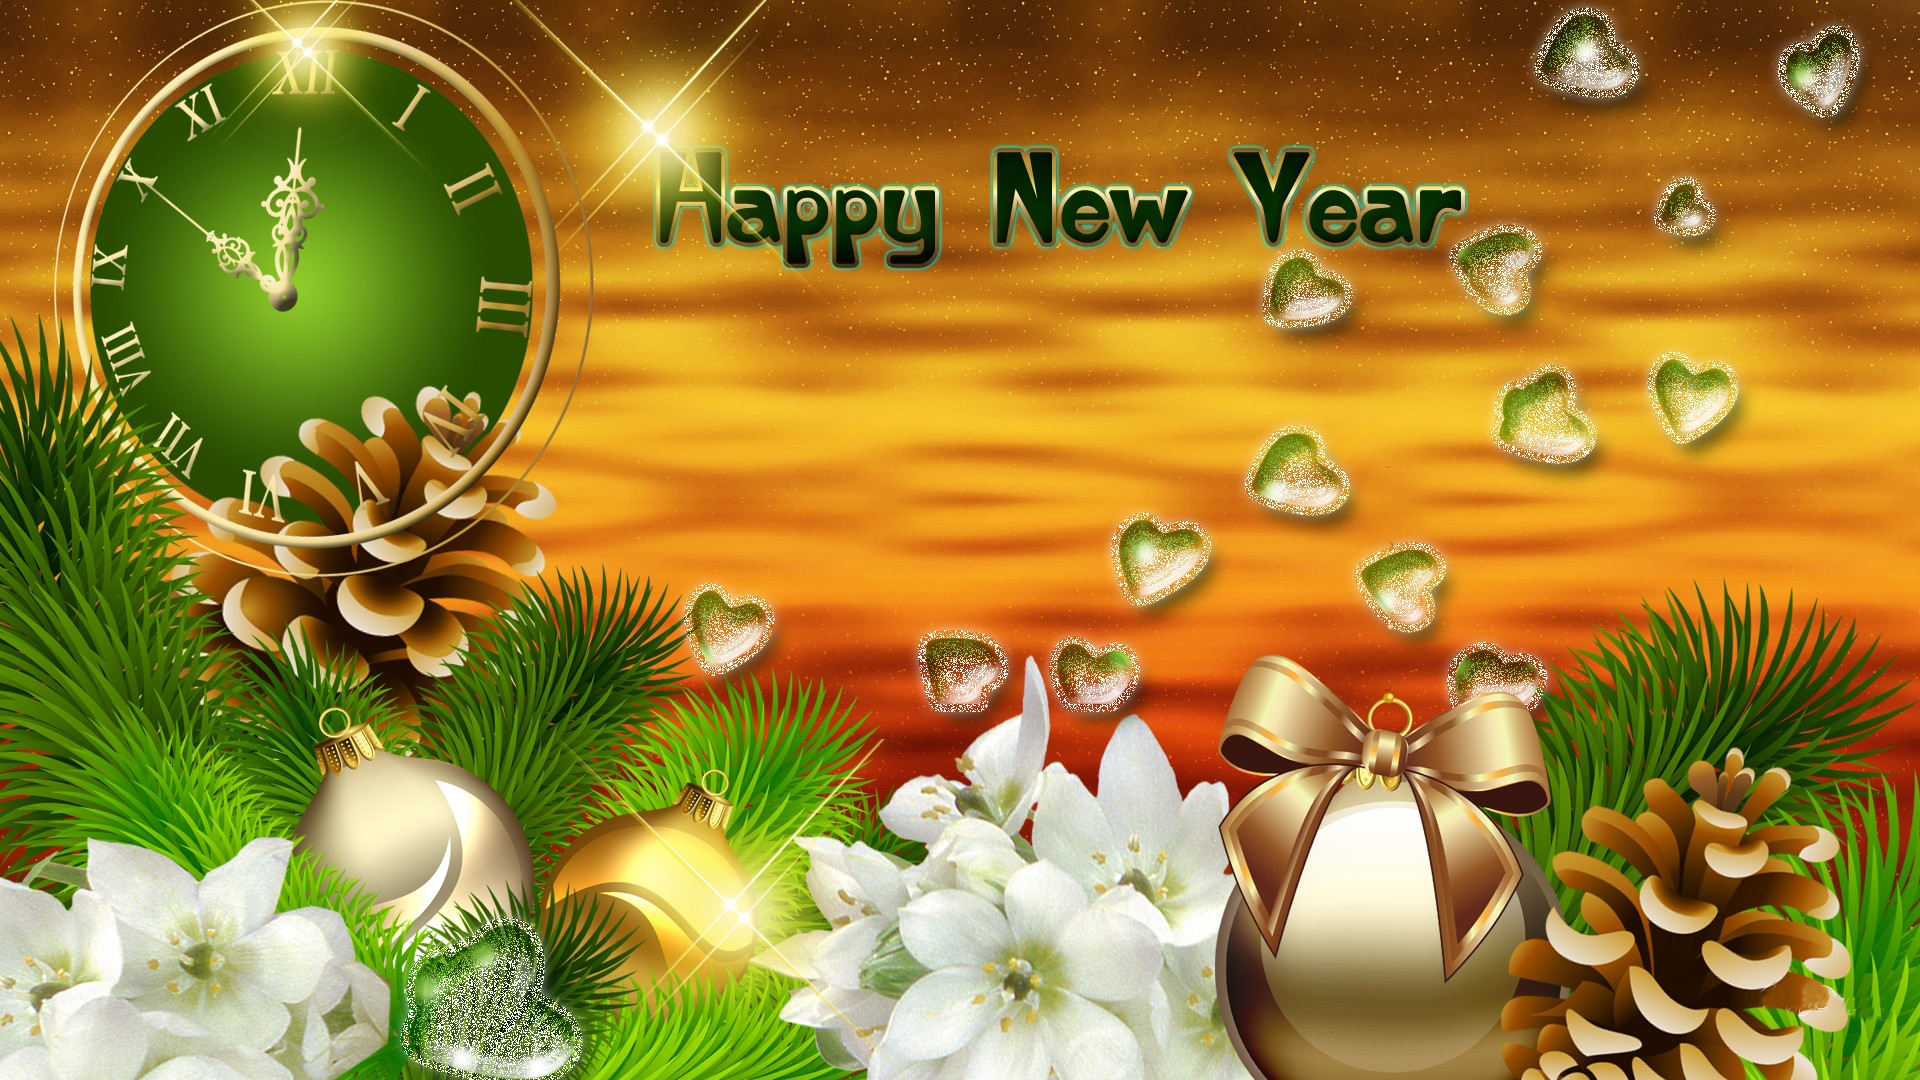 Happy New Year Desktop Hd Wallpapers For Laptop Pc Mobile 1920x1080 :  